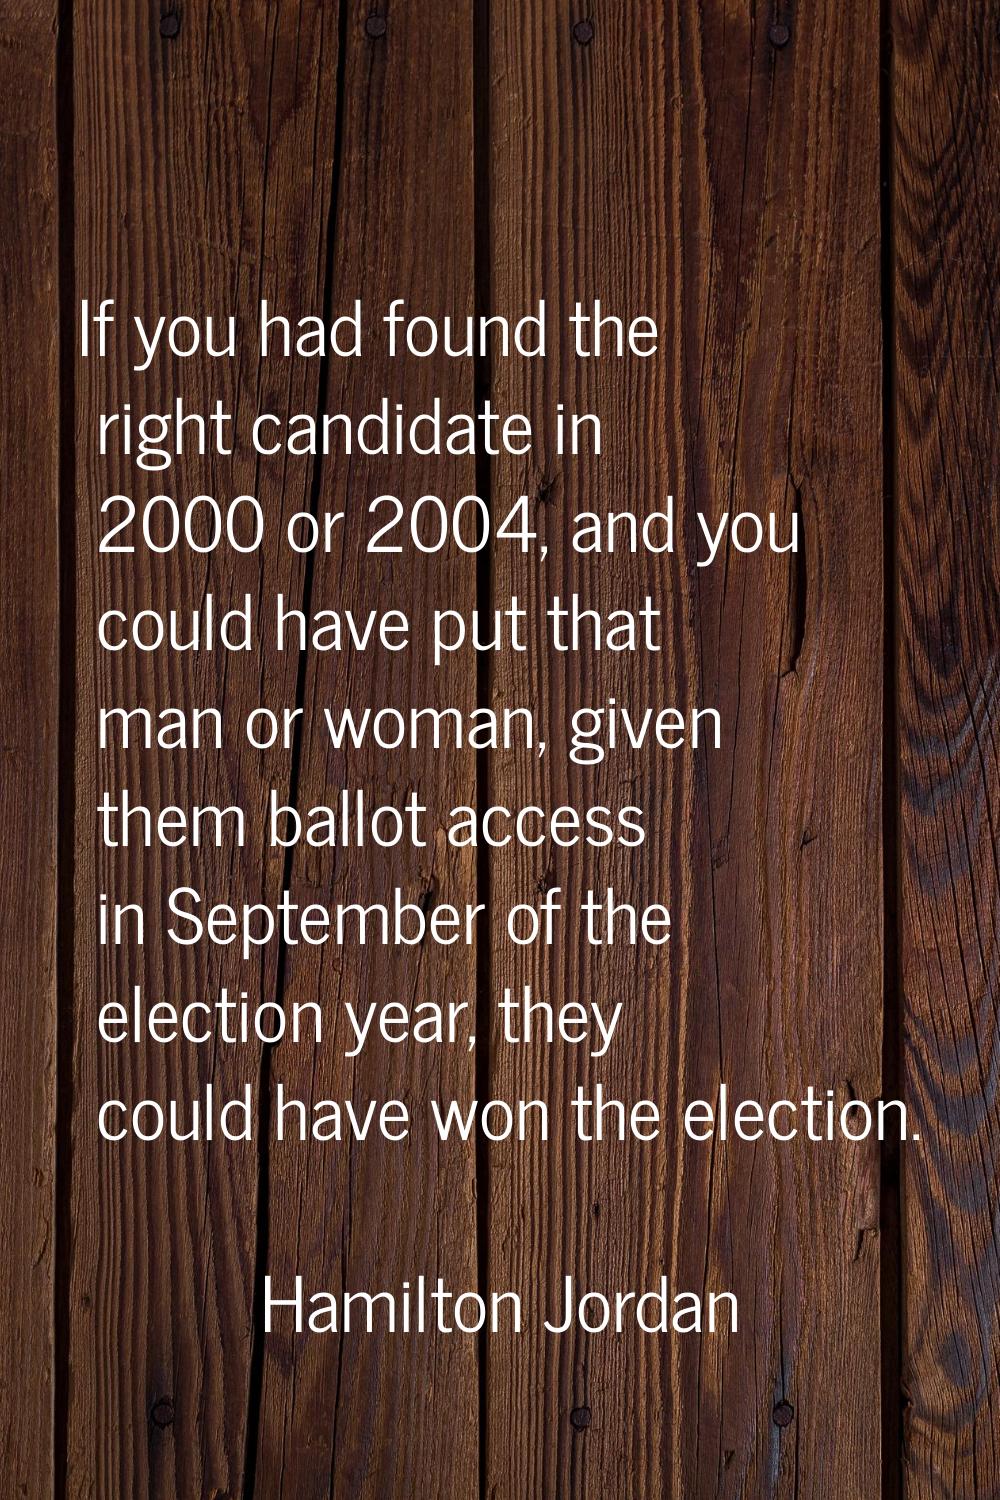 If you had found the right candidate in 2000 or 2004, and you could have put that man or woman, giv